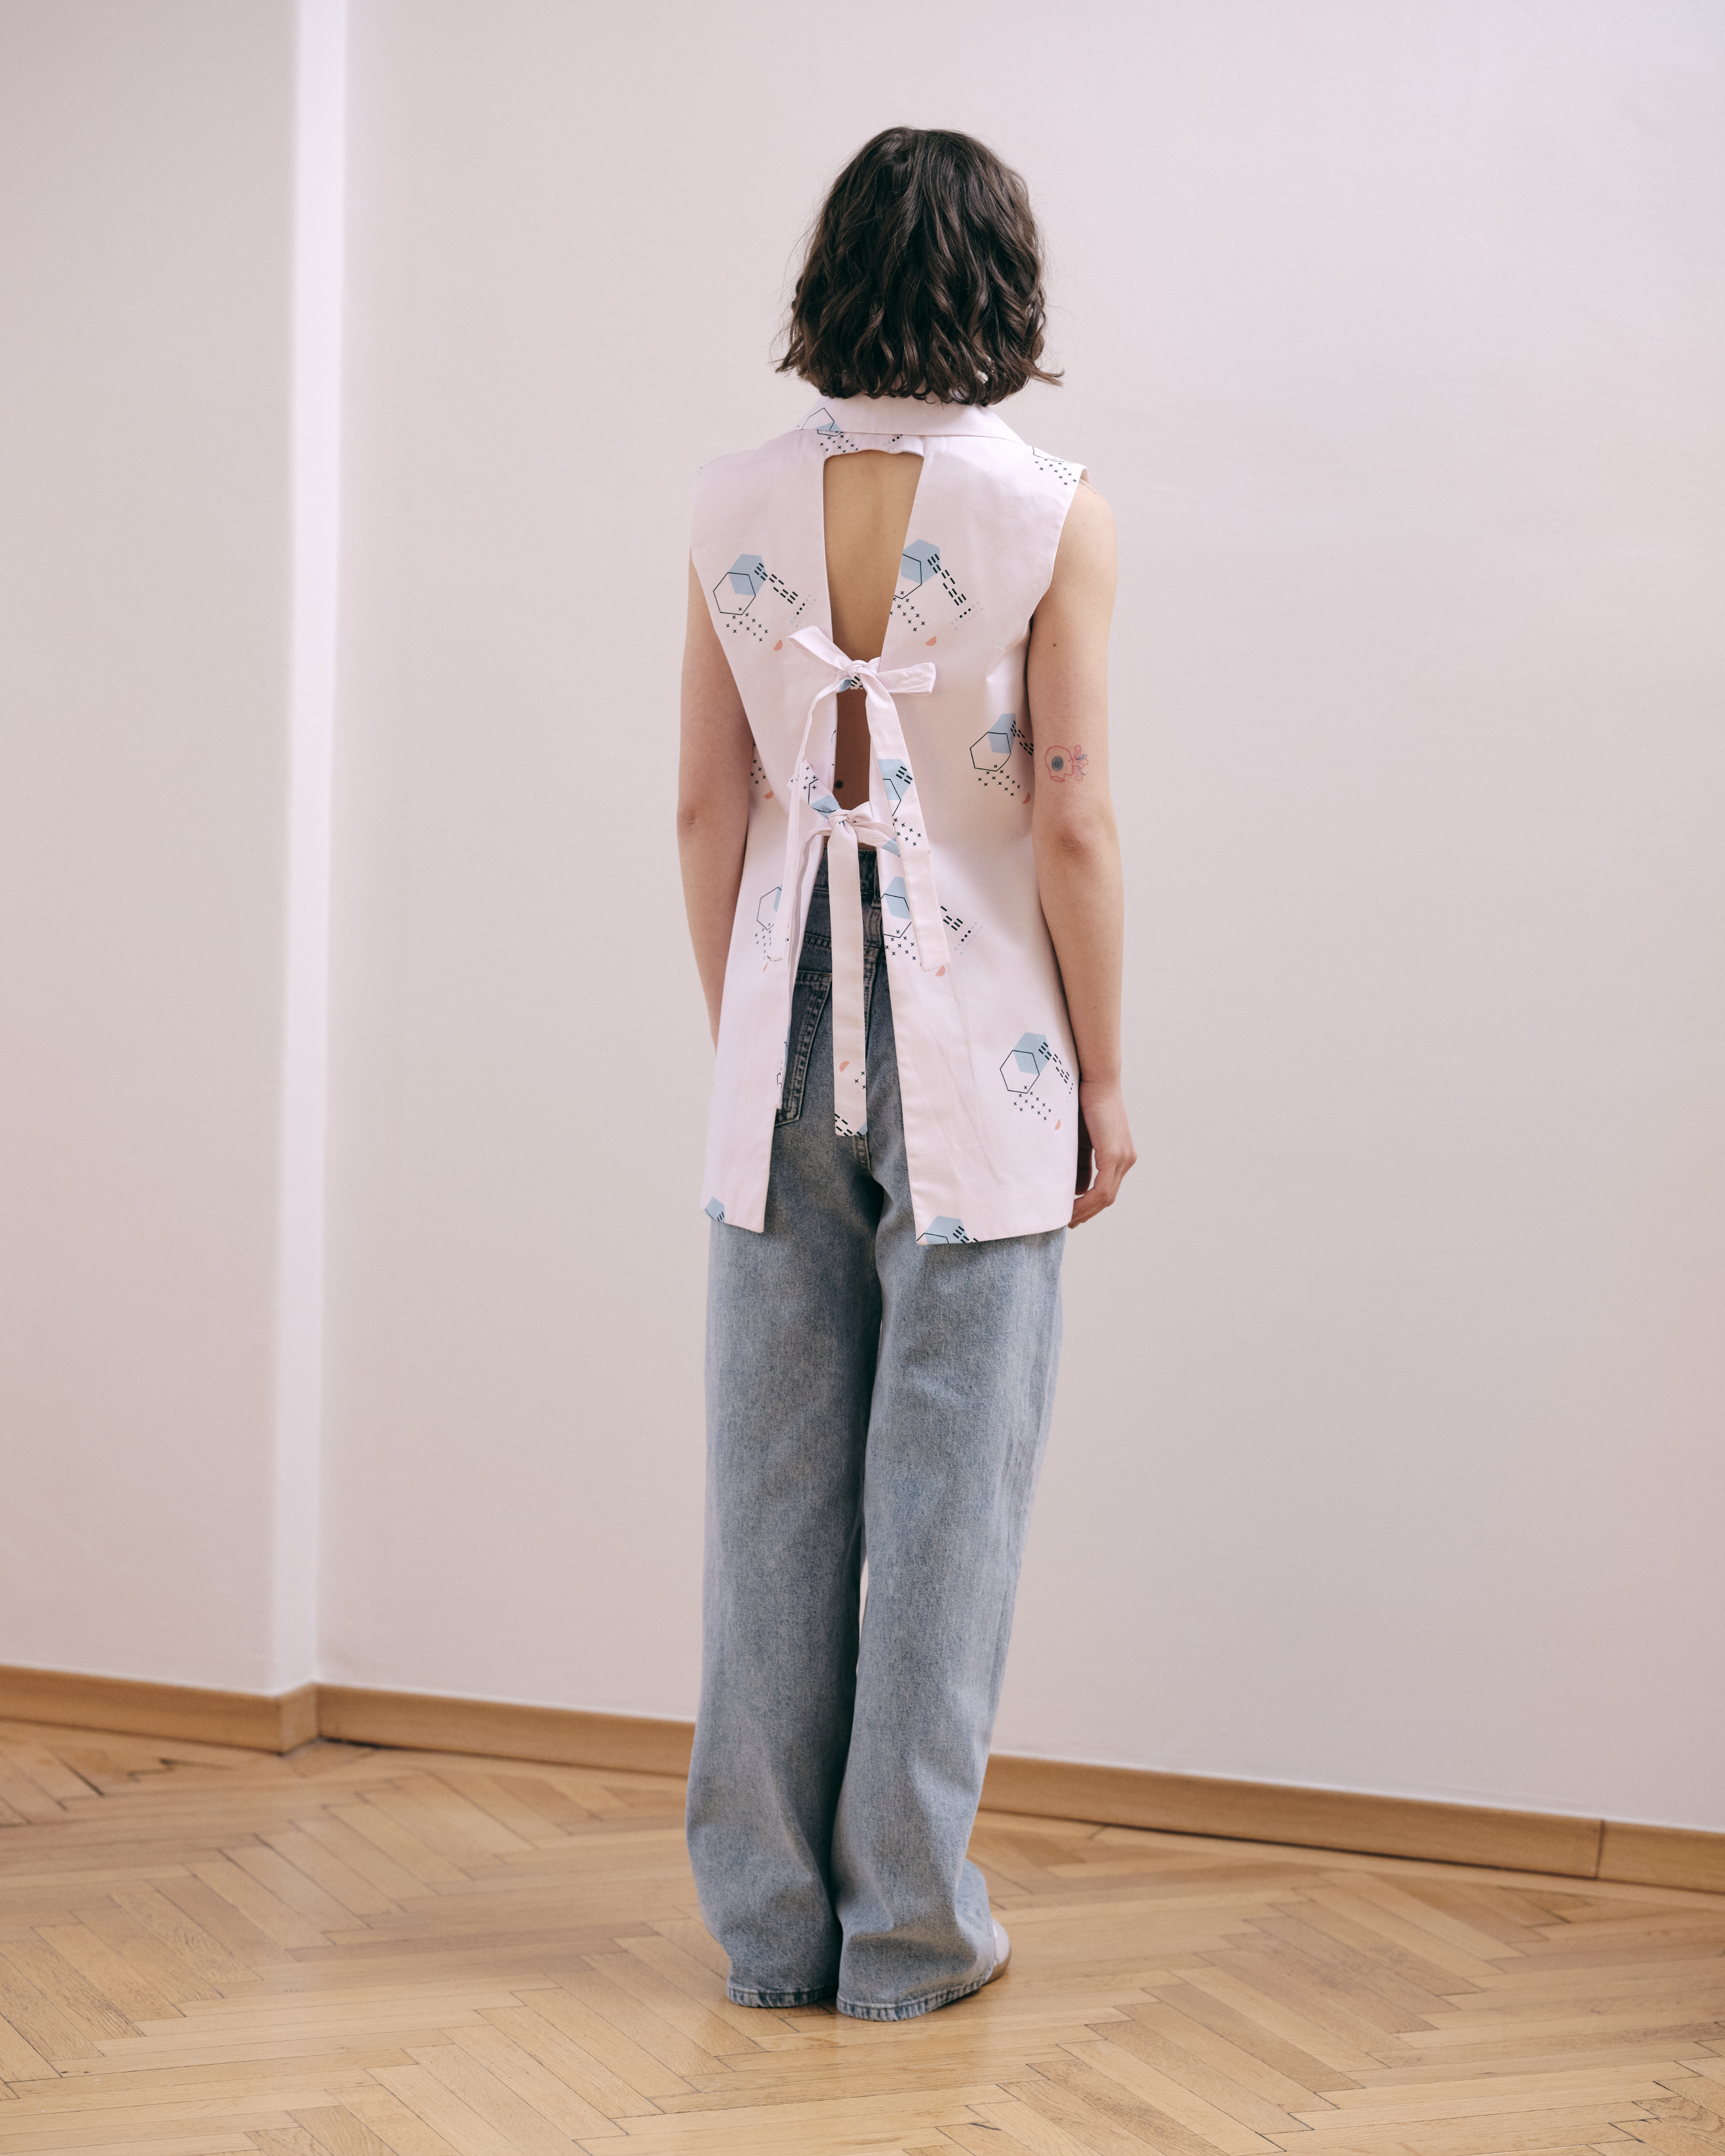 STRUCTURED, verb, construct or arrange according to a plan. Straight-cut oversize vest, with a geometric shawl collar. Unique patterns designed by the ROAD. The vest has an open back and ties that can be adjusted. Made in 100% cotton